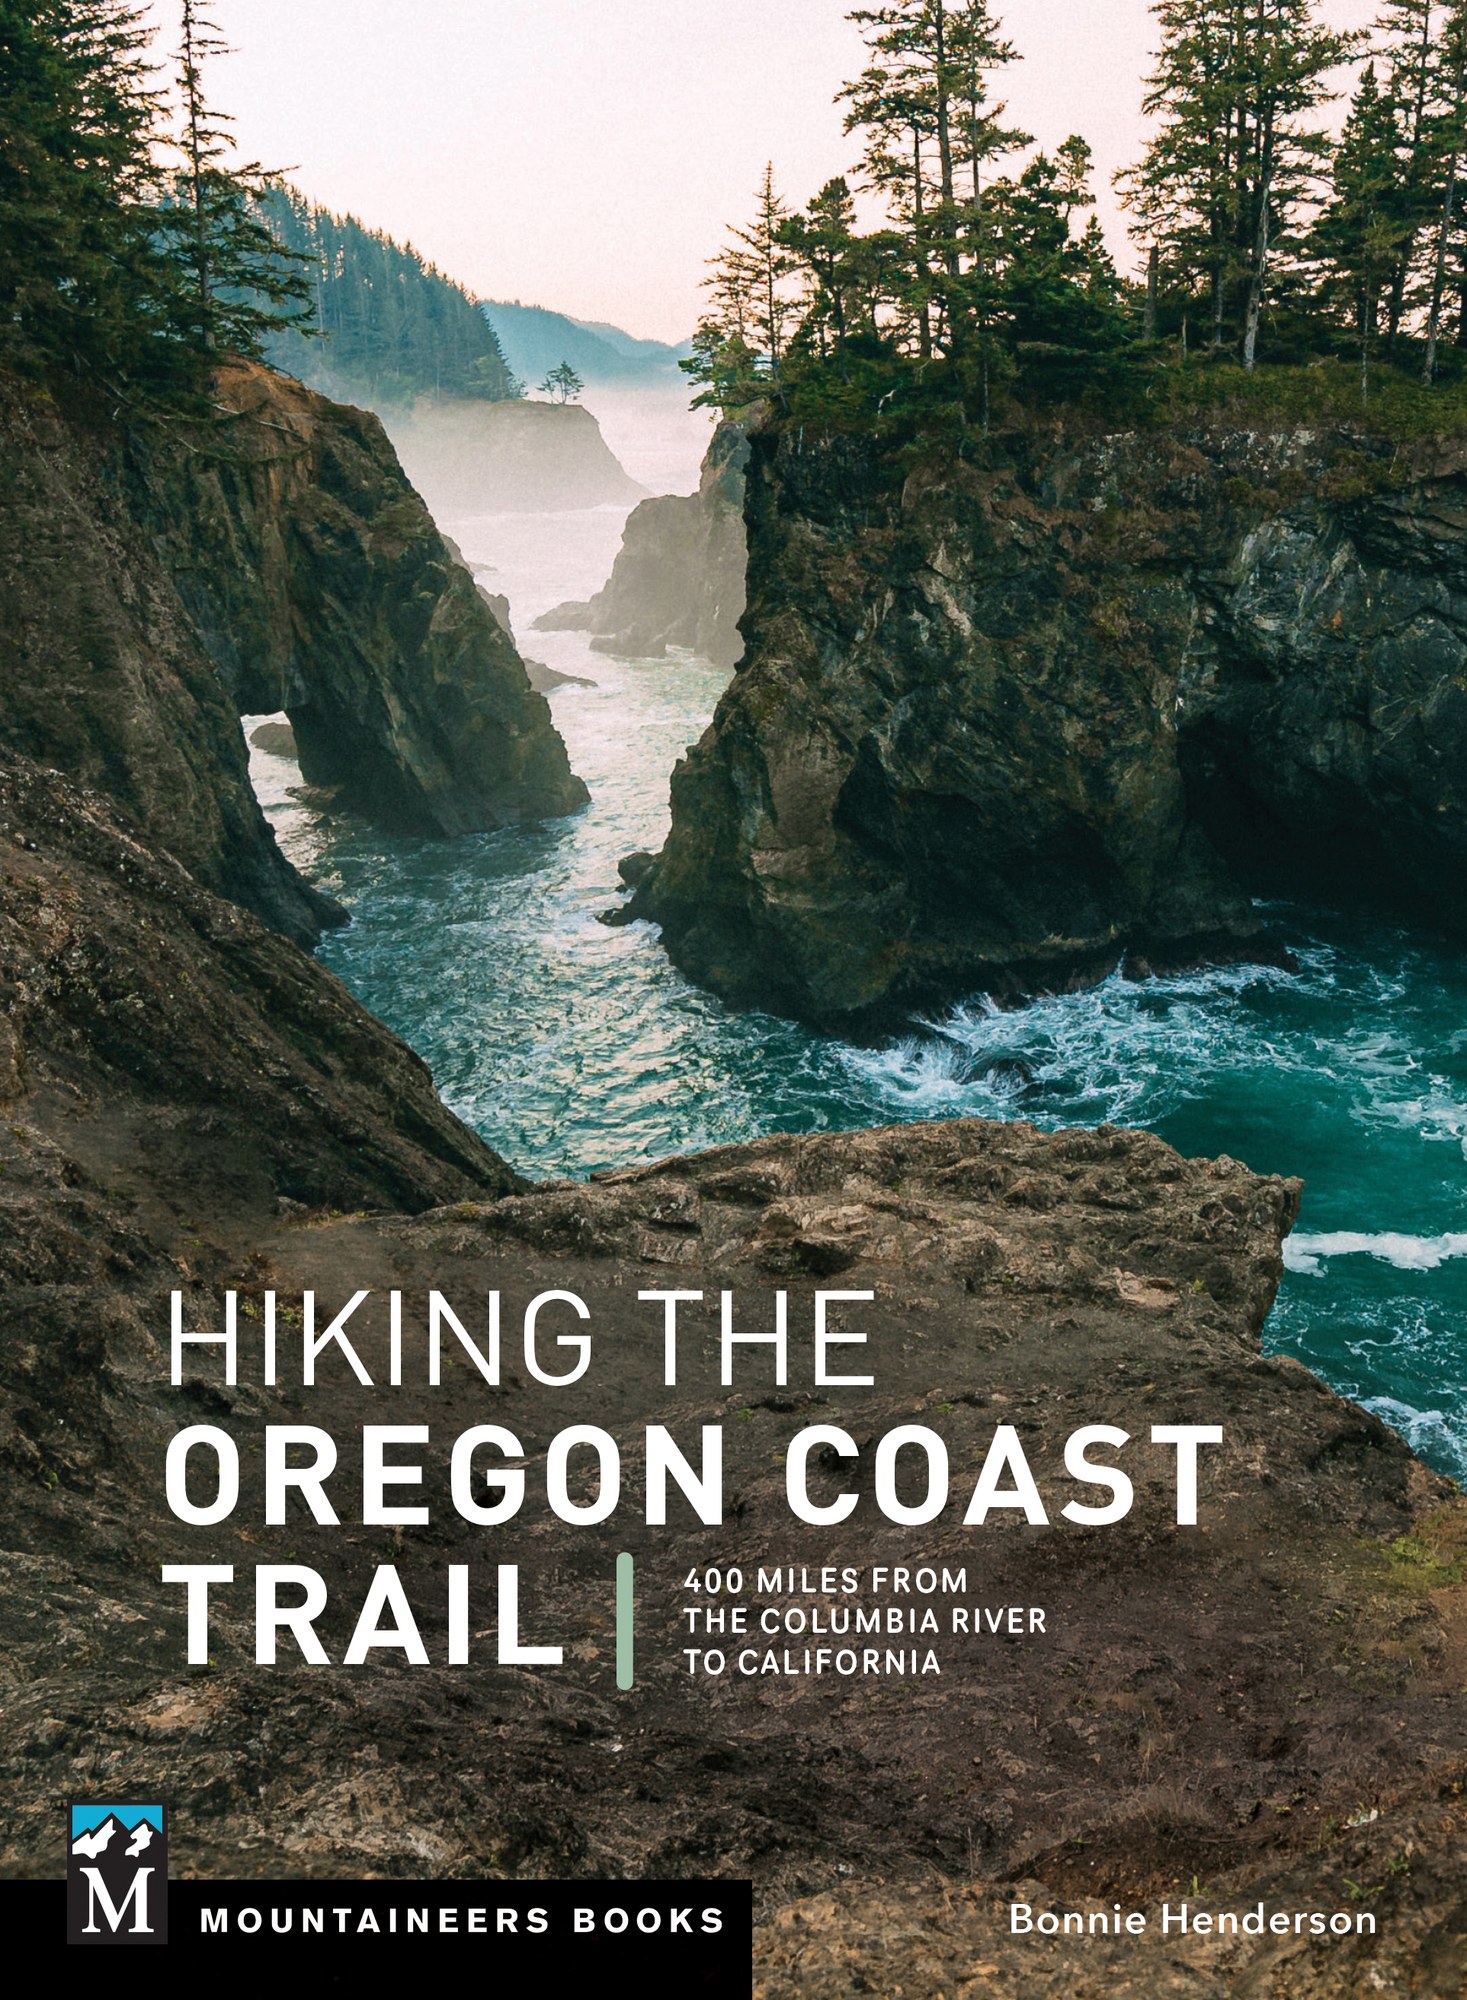 https://www.mountaineers.org/books/books/hiking-the-oregon-coast-trail-400-miles-from-the-columbia-river-to-california/@@images/image